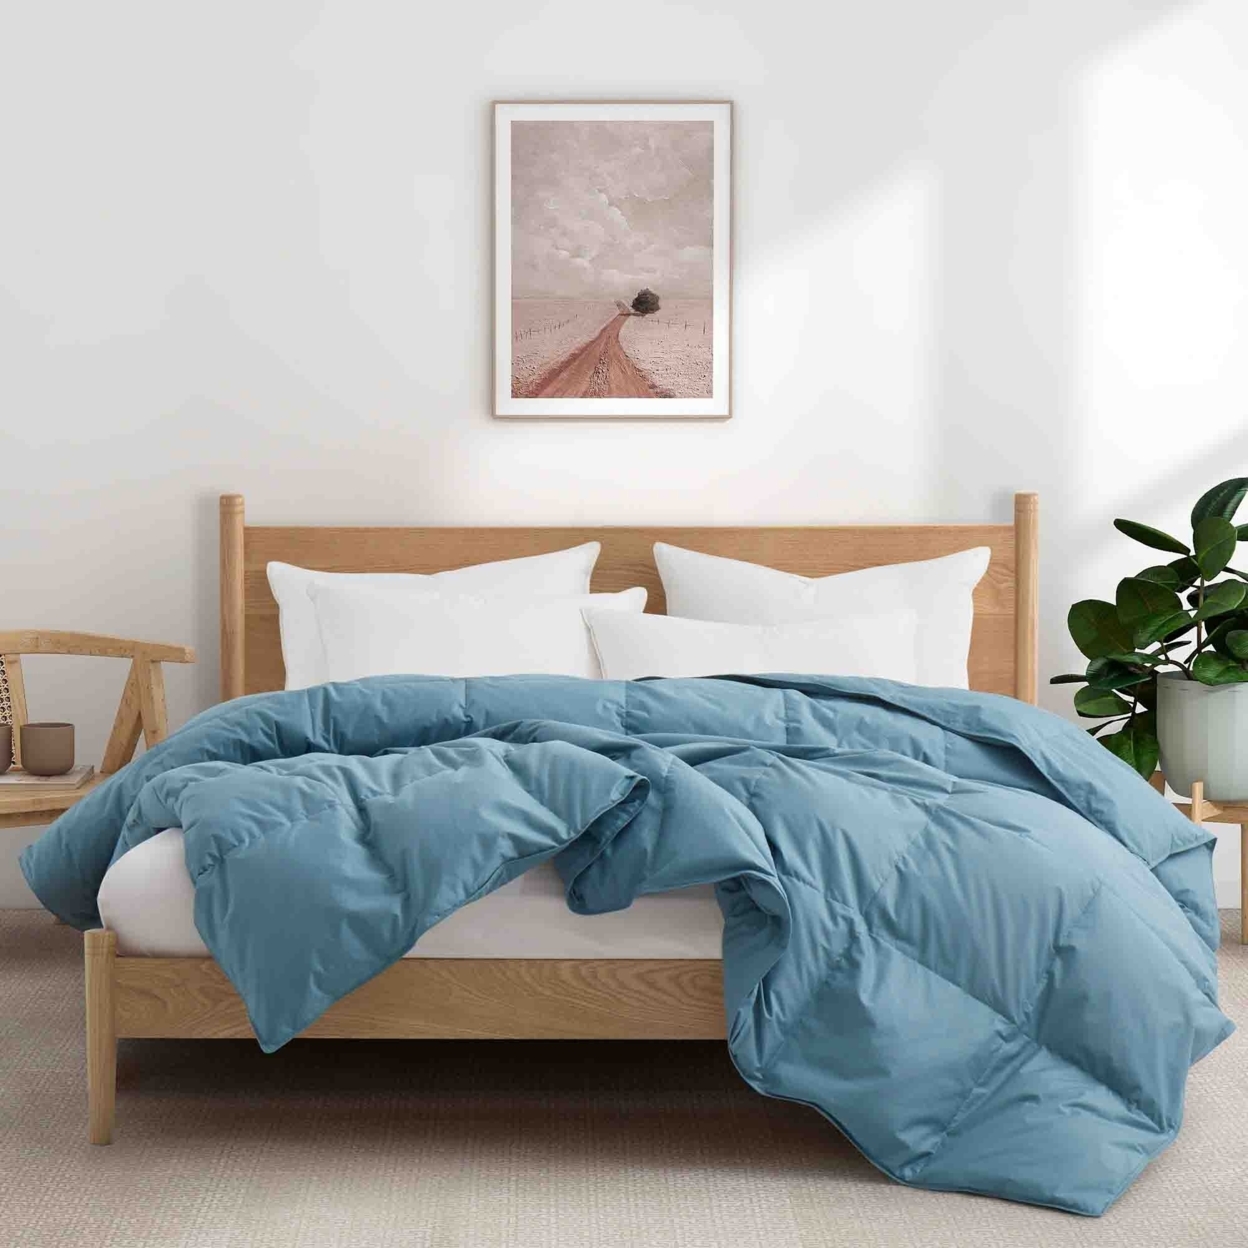 All Season Organic Cotton Comforter Filled With Down And Feather Fiber - Steel Blue, King